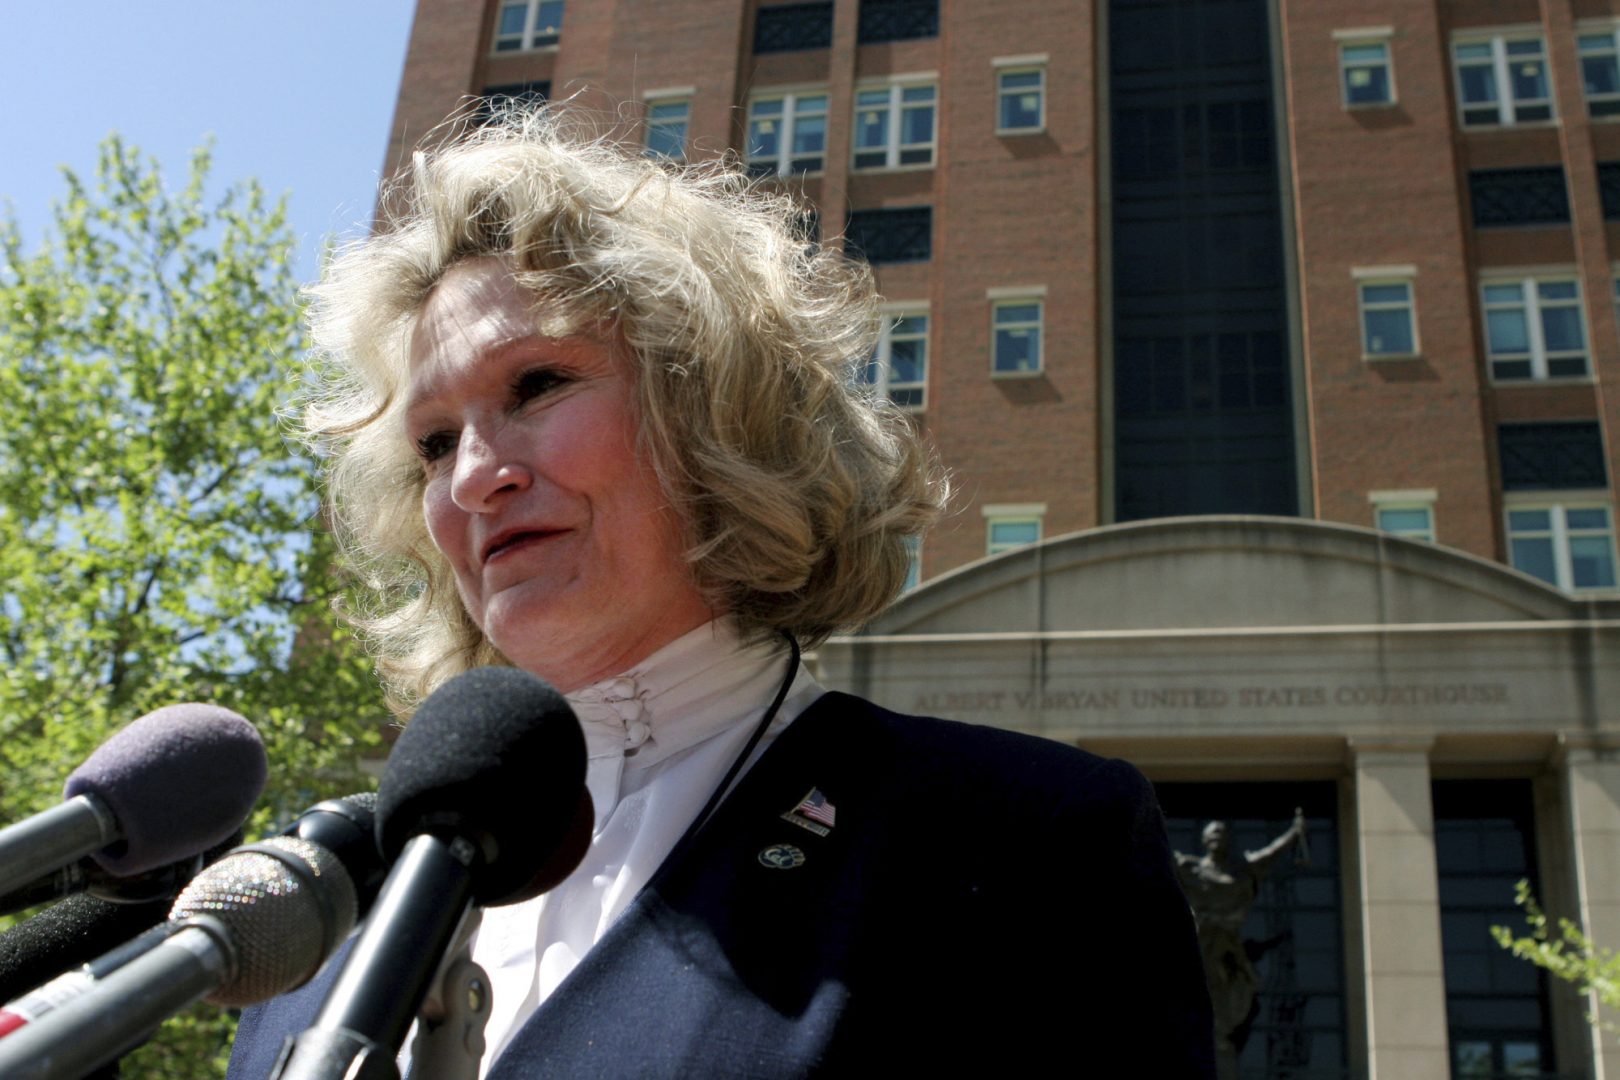 In this April 20, 2006, file photo, Alice Hoagland, whose son Mark Bingham died on United Airline's Flight 93 on Sept. 11, 2001, speaks to reporters in front of U.S. District Court in Alexandria, Va. Hoagland, beloved as a mother figure by players in the global gay rugby movement her own son Mark Bingham helped establish shortly before he perished as one of the heroes of Flight 93, died Dec. 22, 2020, in her sleep at her home in California after battling Addison’s disease.